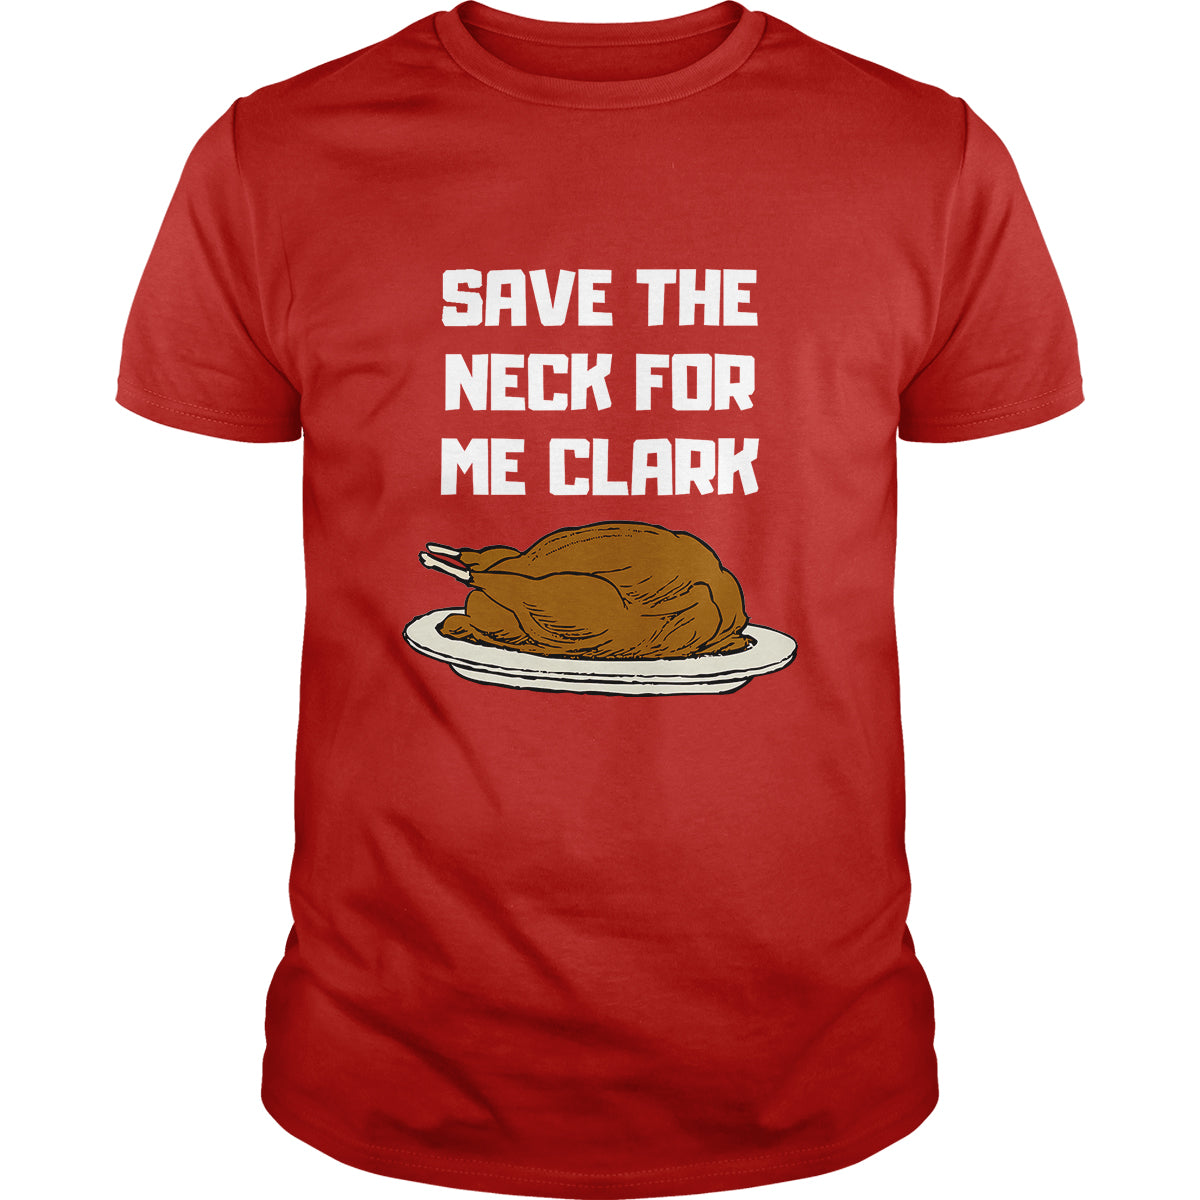 Save The Neck For Me Clark - BustedTees.com